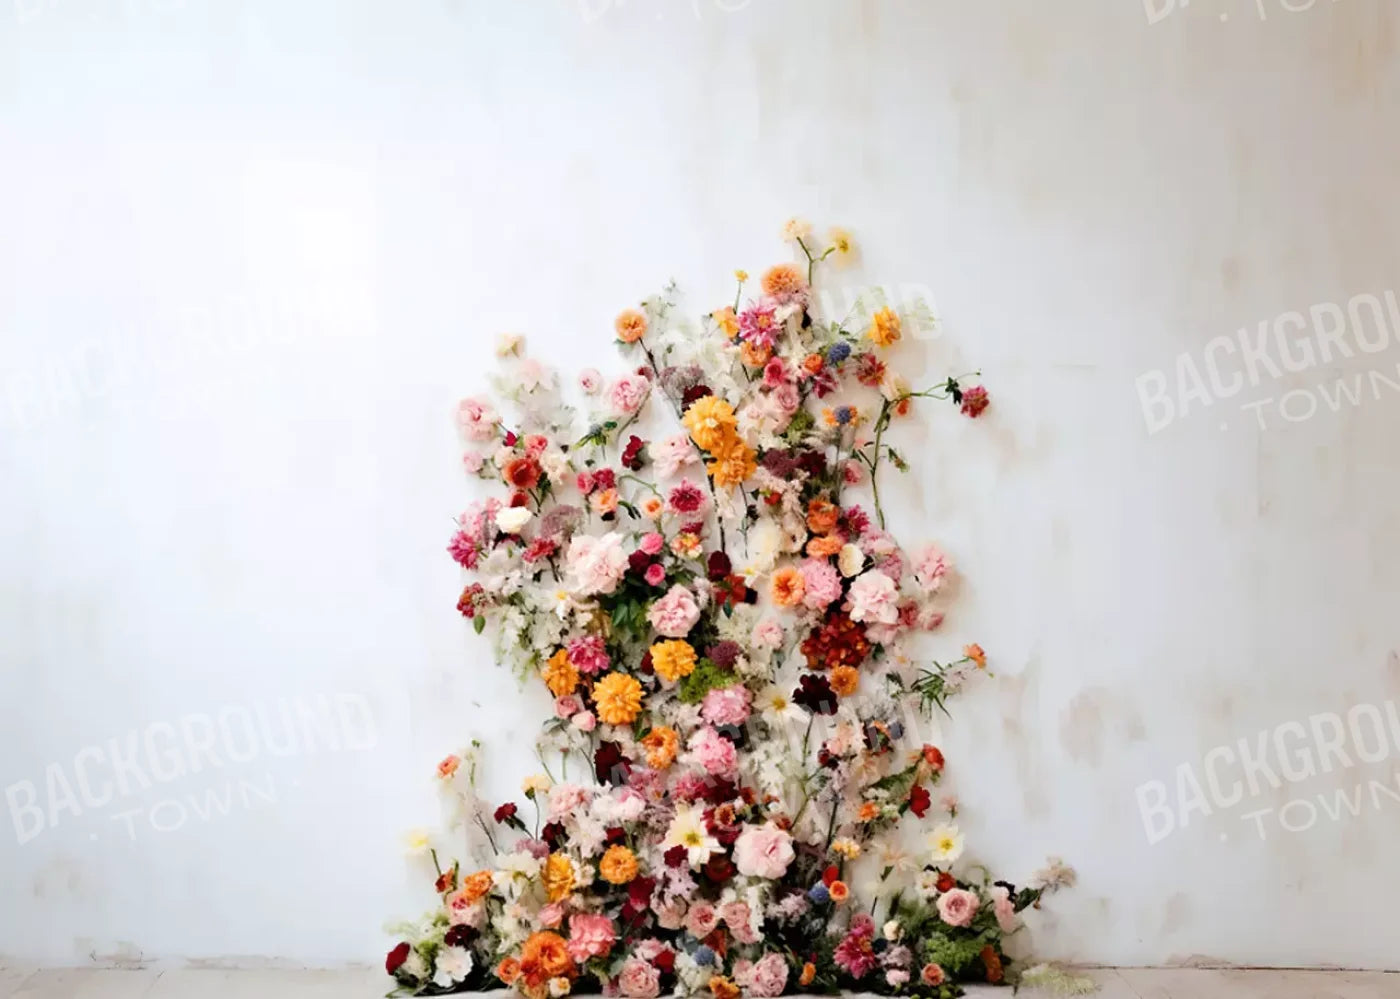 Flower Tower I 7’X5’ Ultracloth (84 X 60 Inch) Backdrop